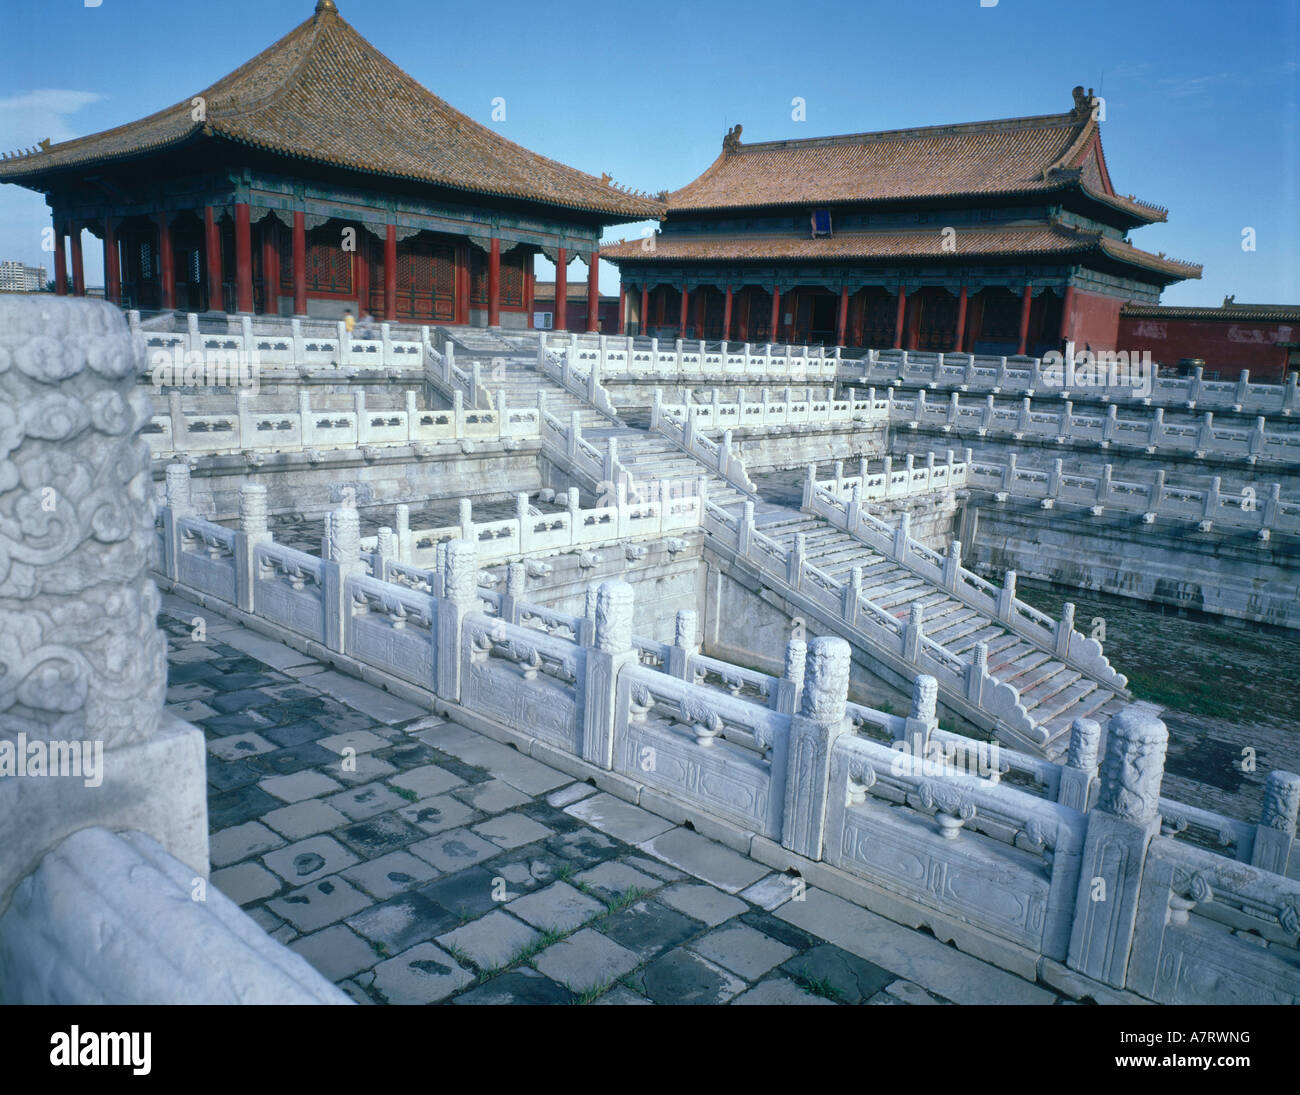 Interiors of palace, Imperial Palace, Beijing, China Stock Photo